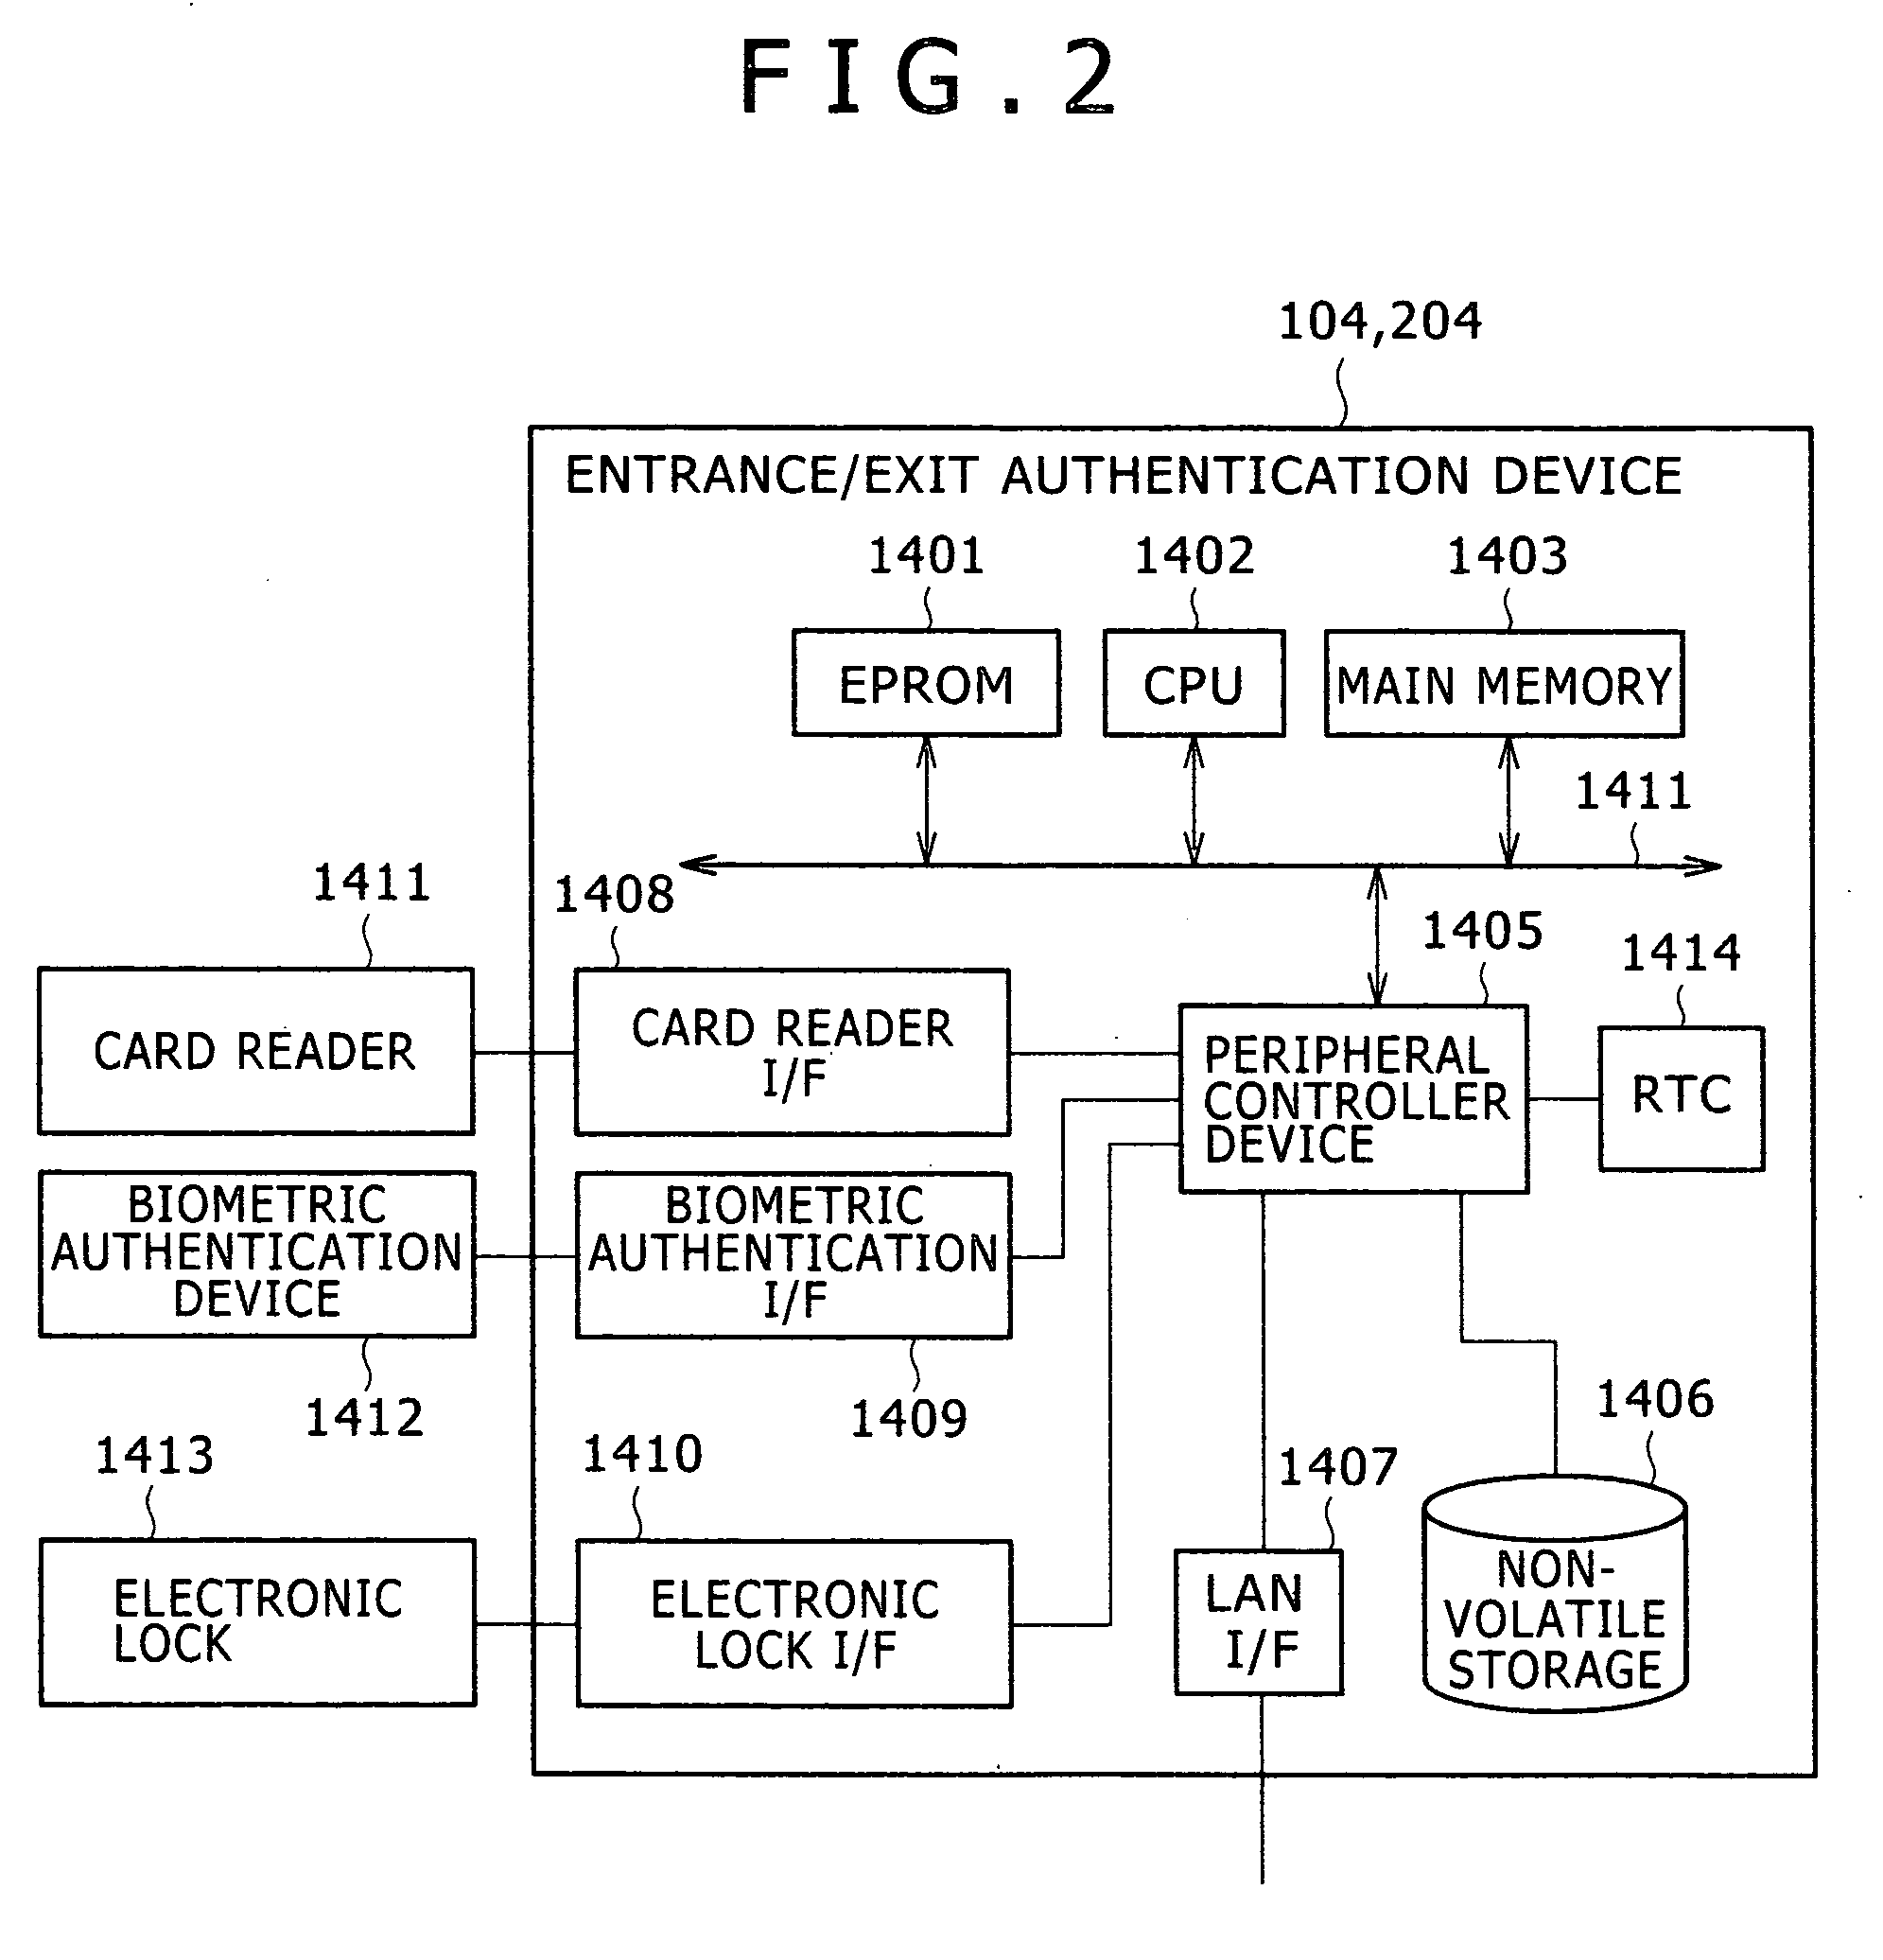 Service authentication system, server, network equipment, and method for service authentication